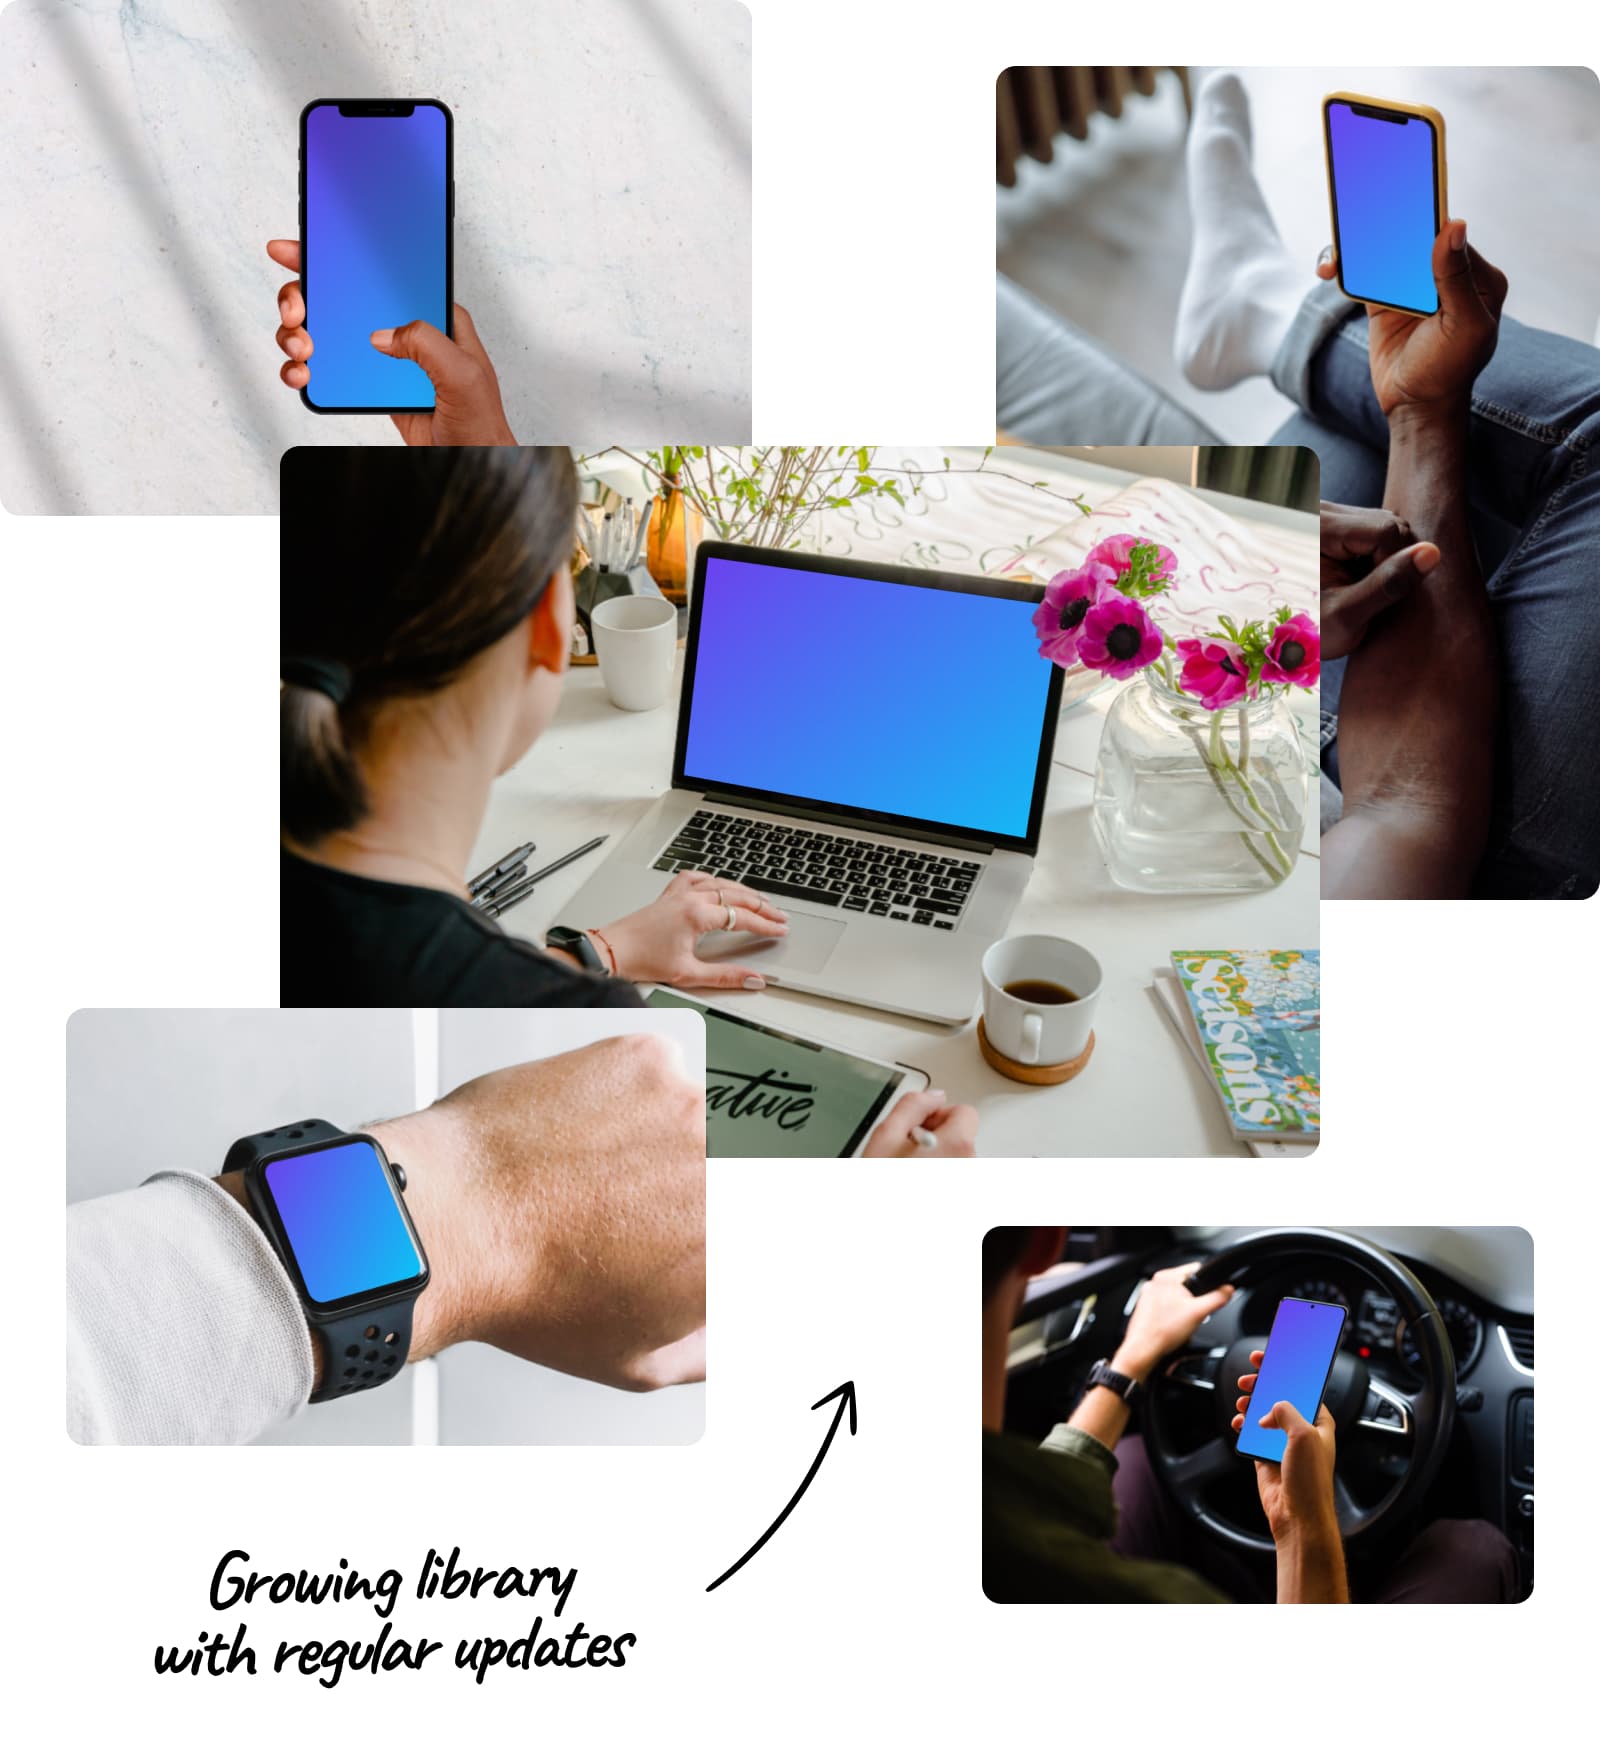 Growing library of device mockups